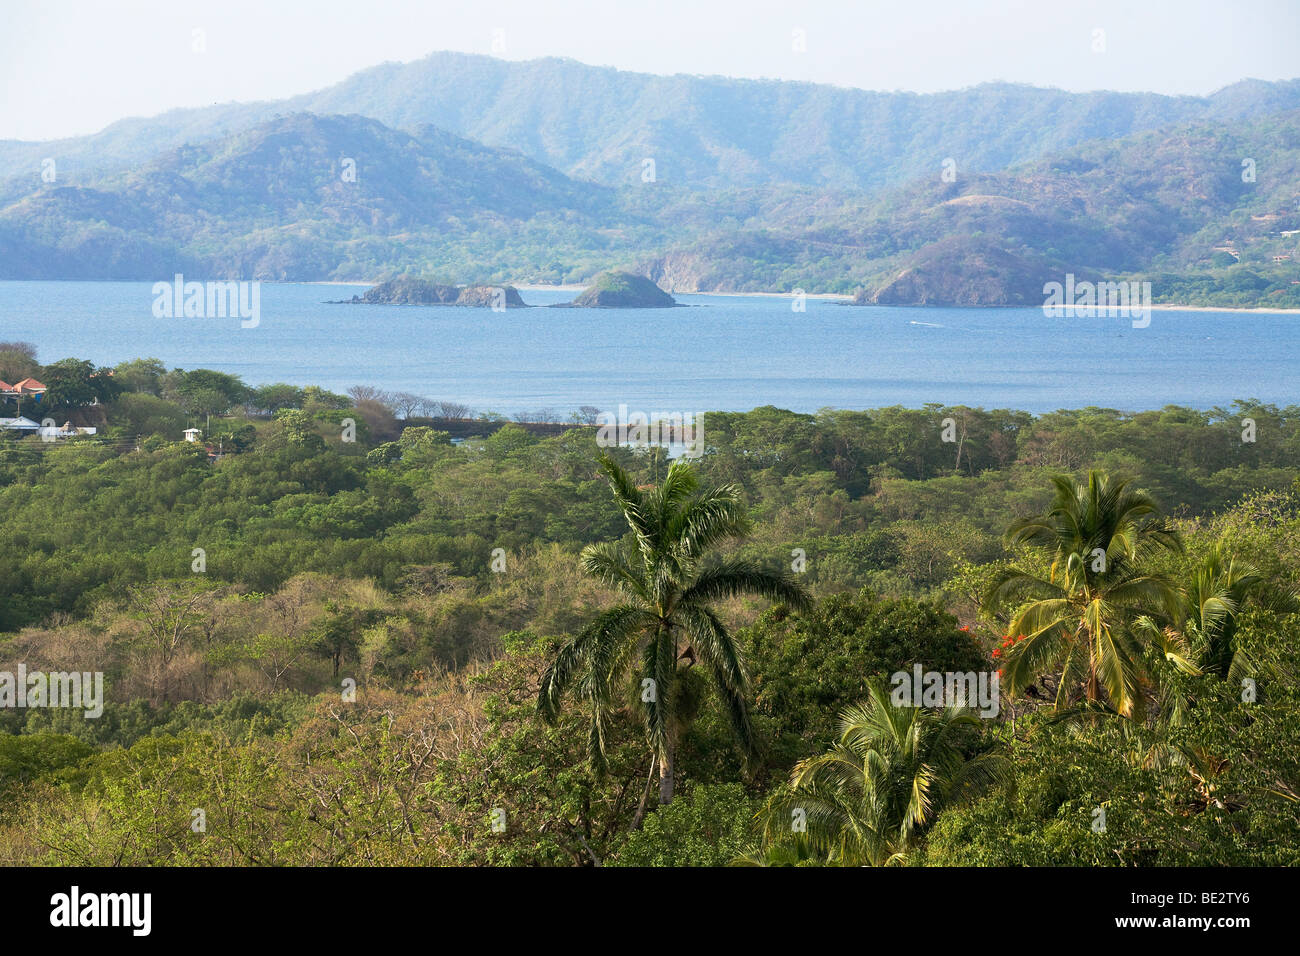 A view of Playa Portrero from Playa Flamingo and the Catalina islands. Stock Photo